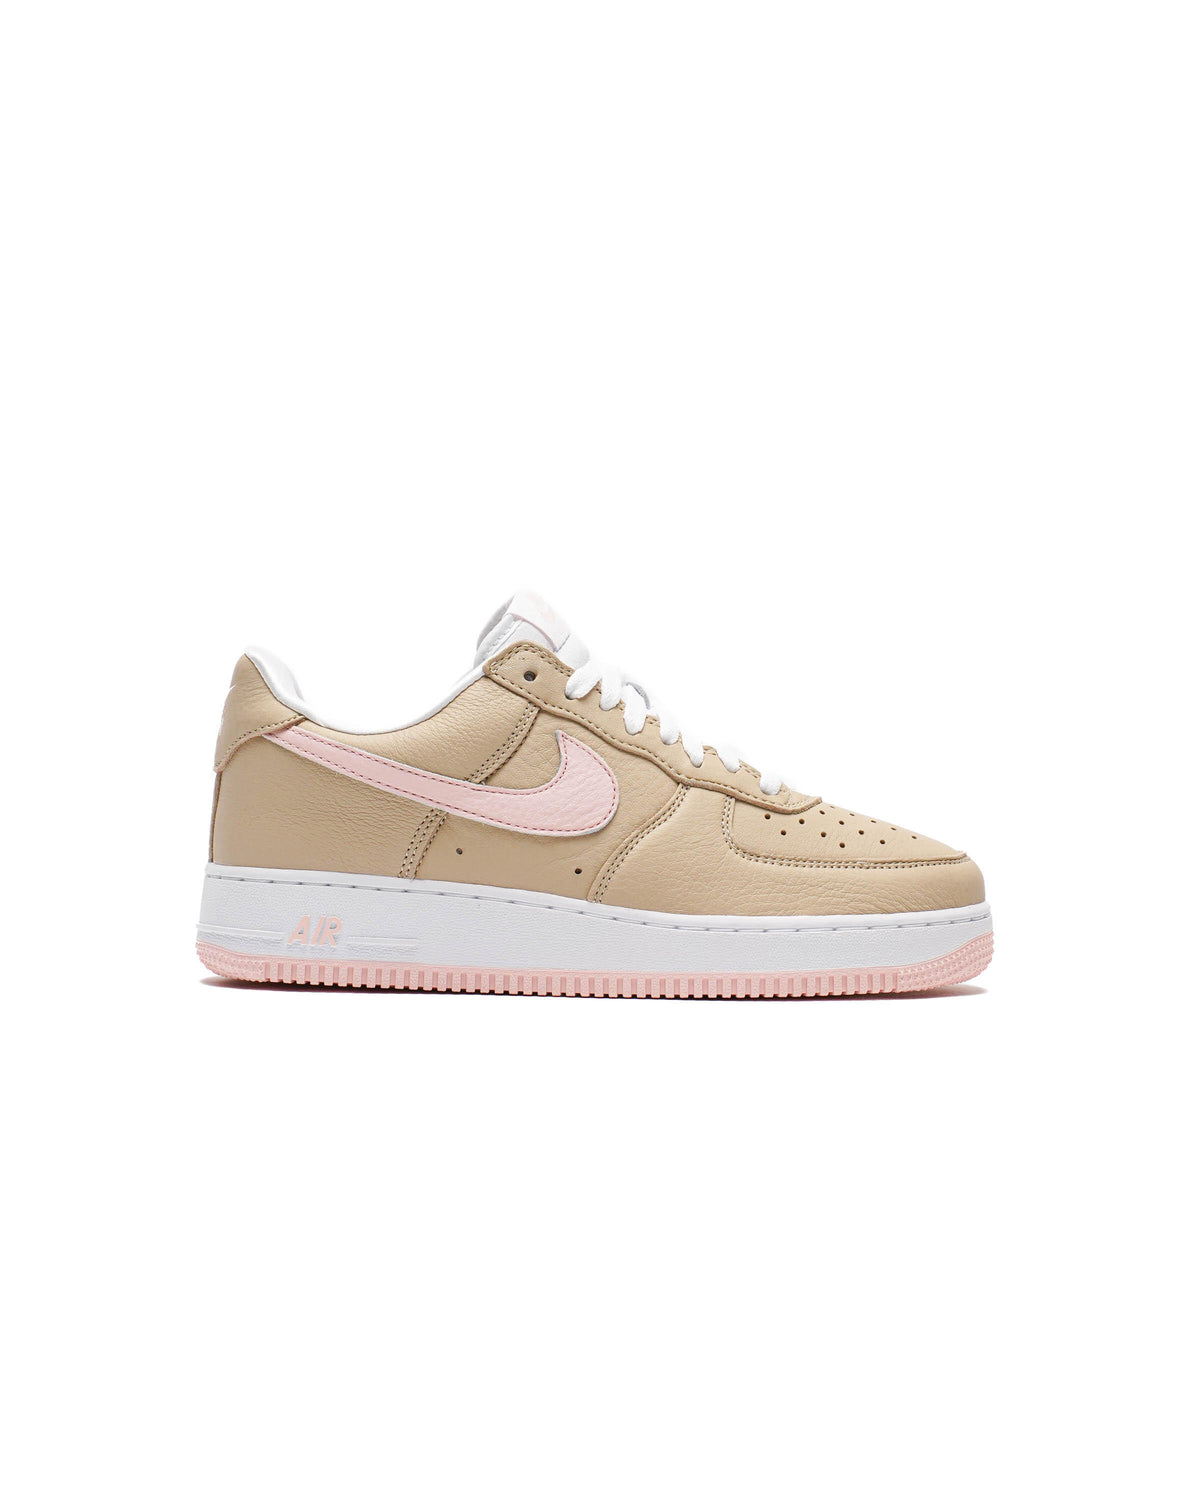 Nike Air Force 1 Low Retro 'Linen'